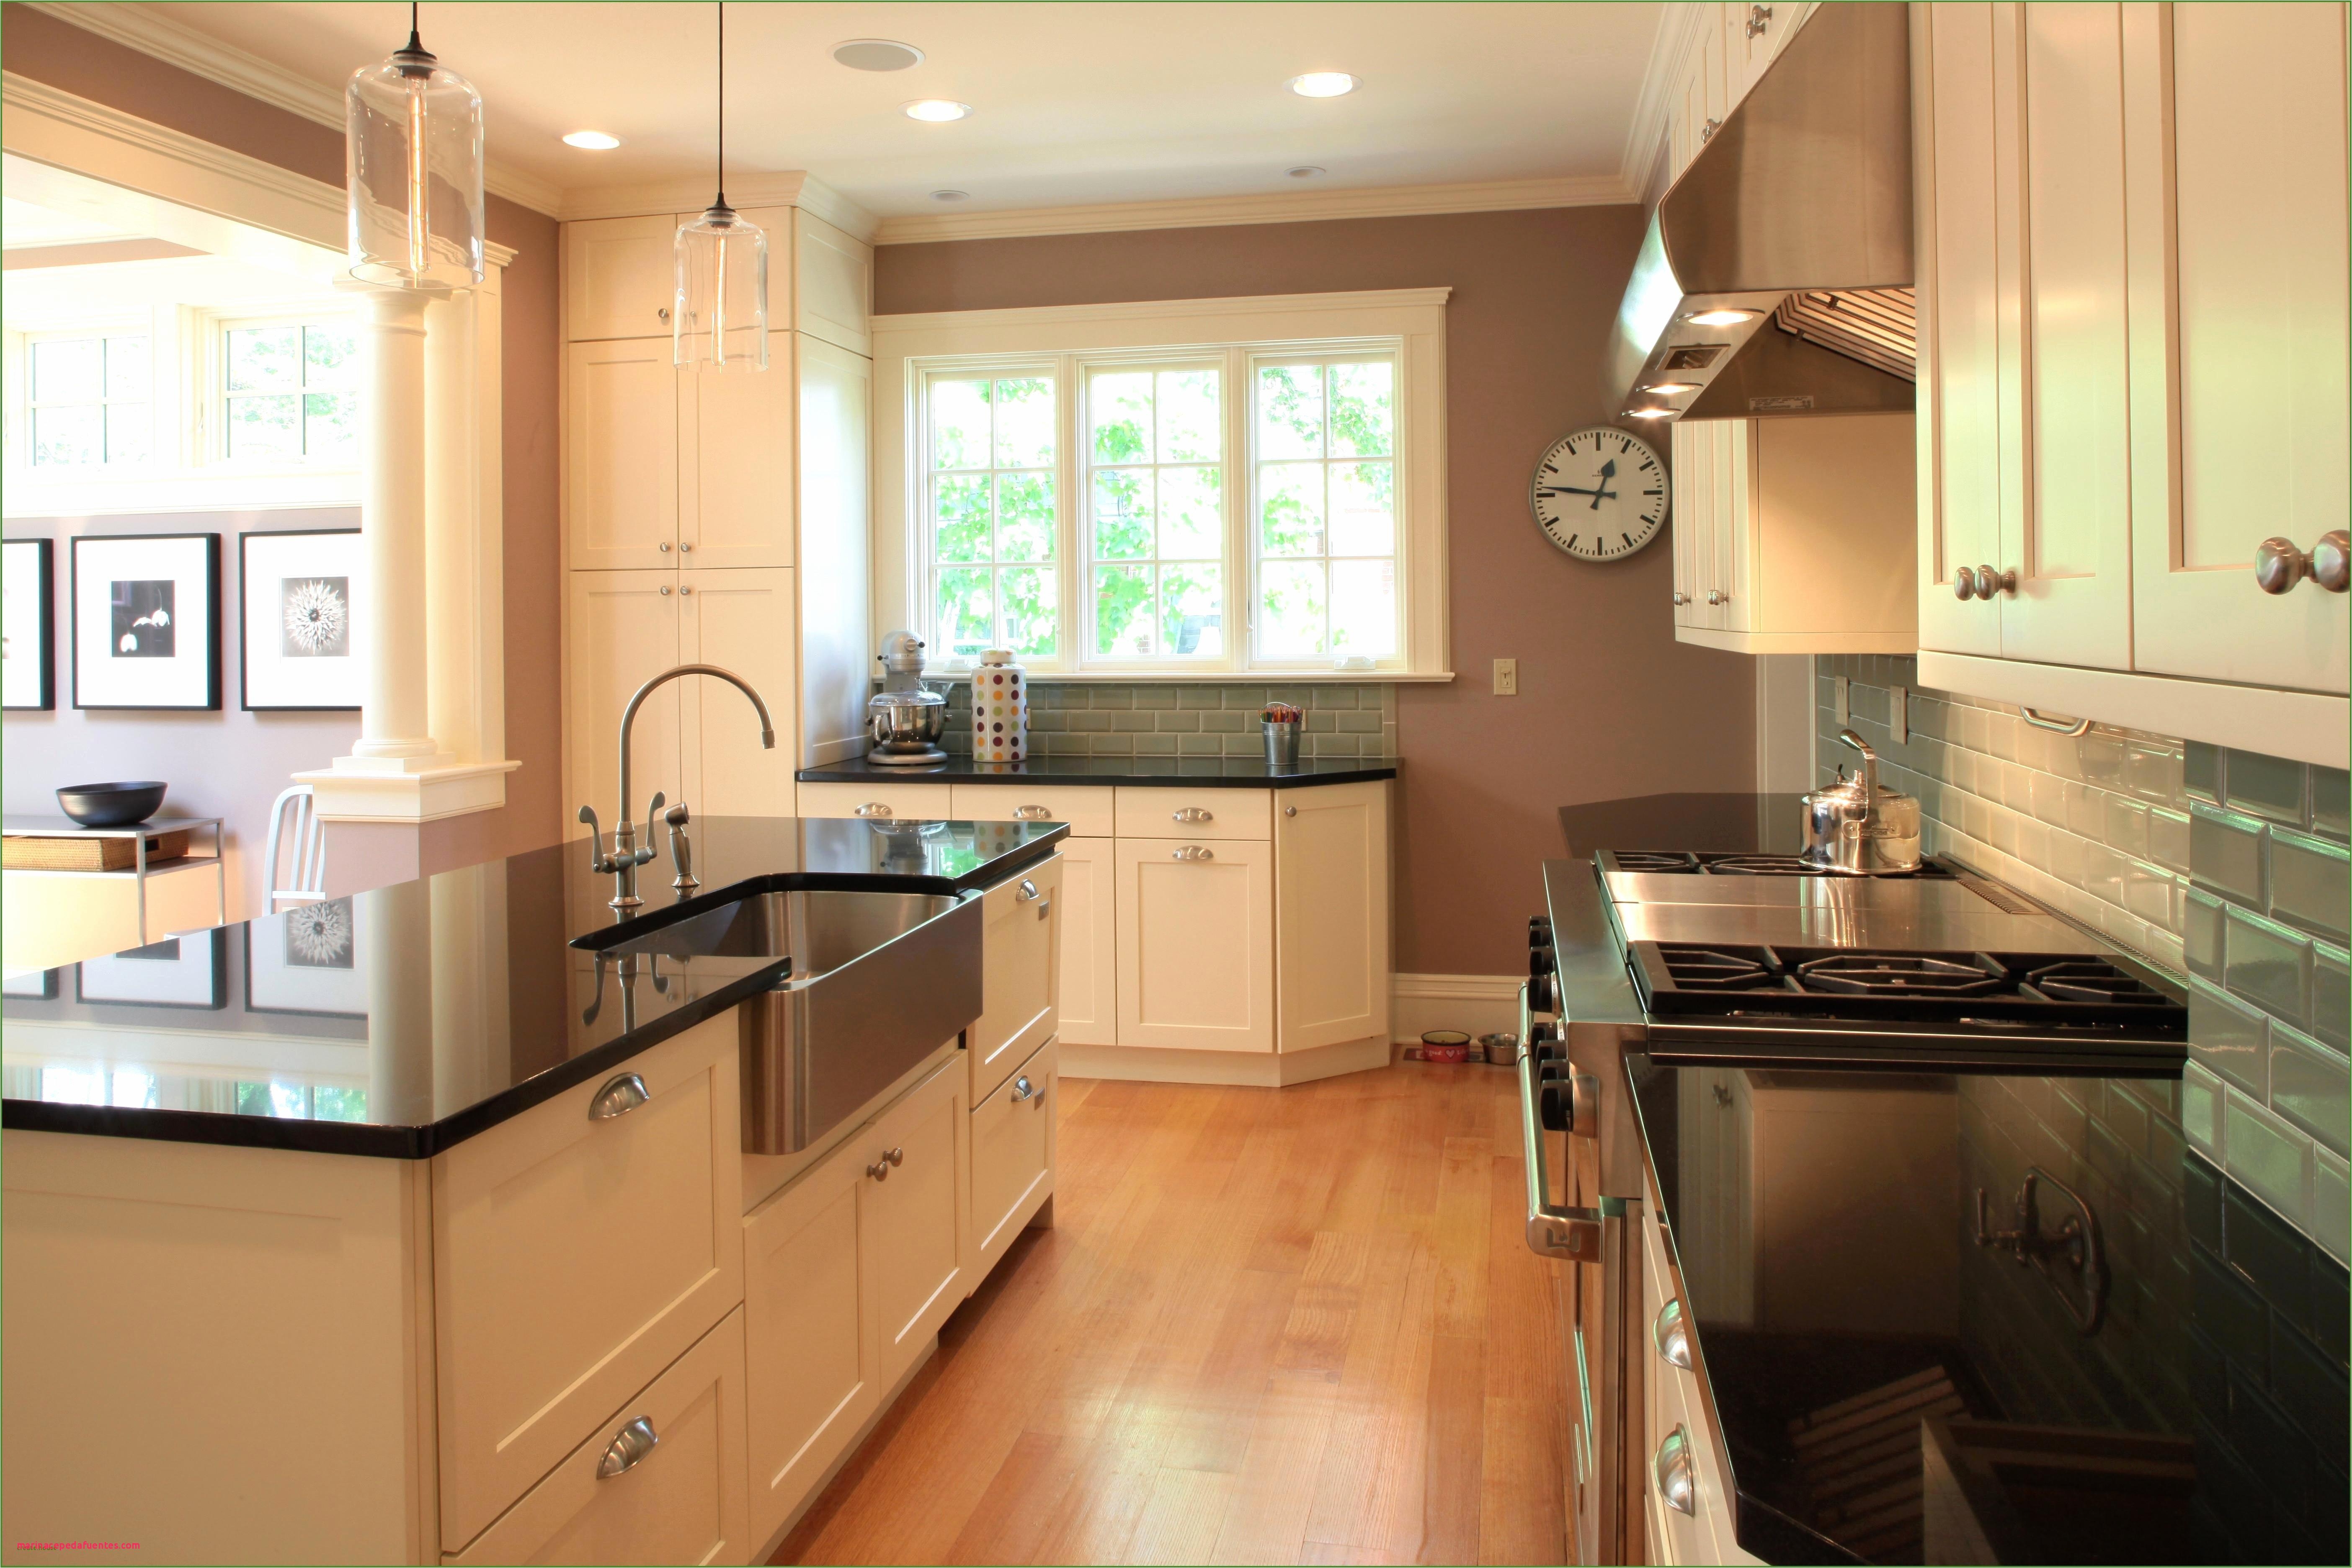 best kitchen cabinets used for sale in beaumont tx concept of kitchen cabinets used for sale